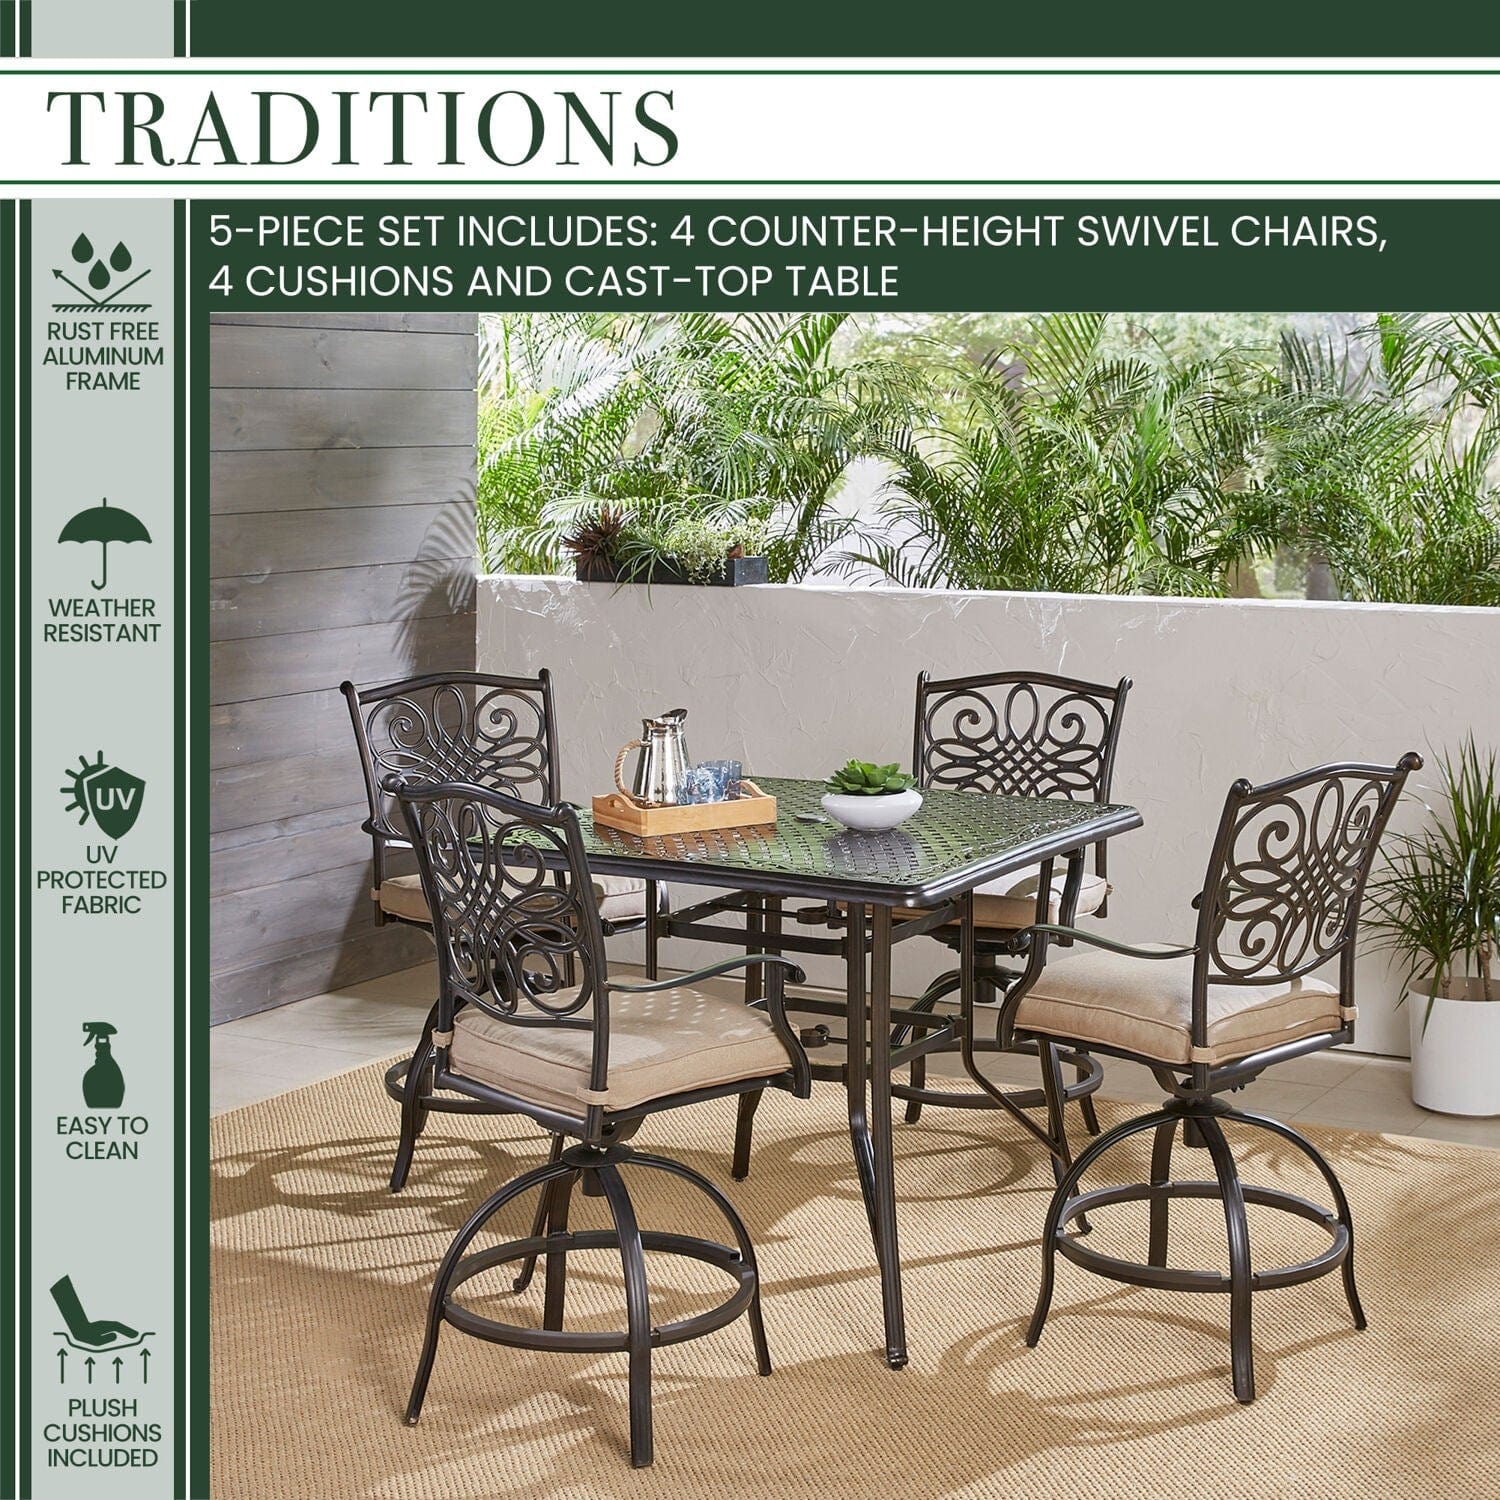 Hanover Outdoor Dining Set Hanover - Traditions 5-Piece High-Dining Set in Tan with a 42 In. Square Cast-top Table |Tan/Cast | TRADDN5PCSQBR